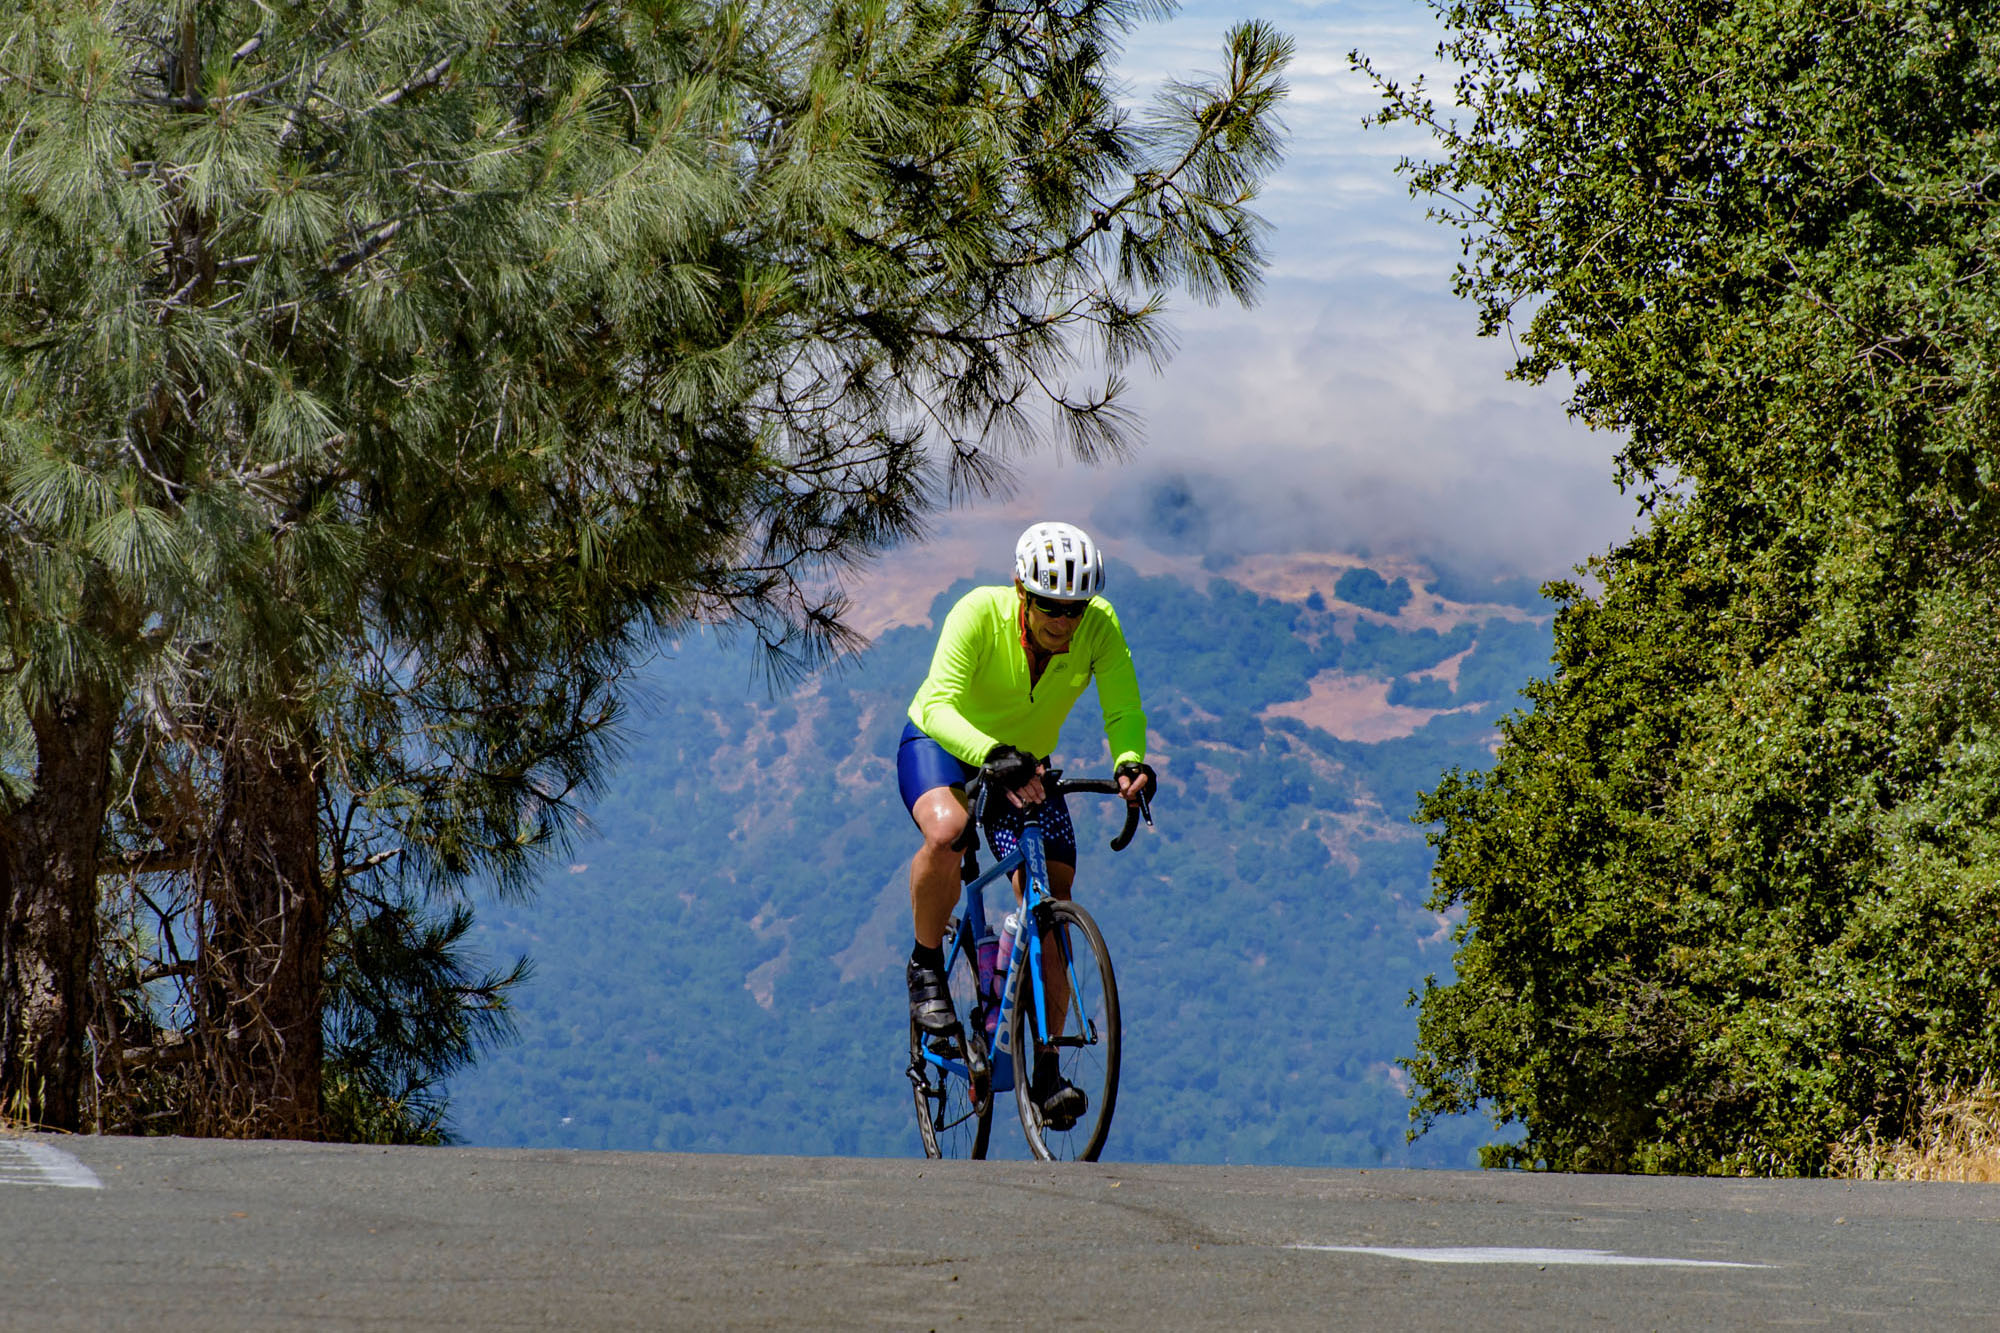 A man crests the top of the hill on his road bike with forested foggy hills in the background